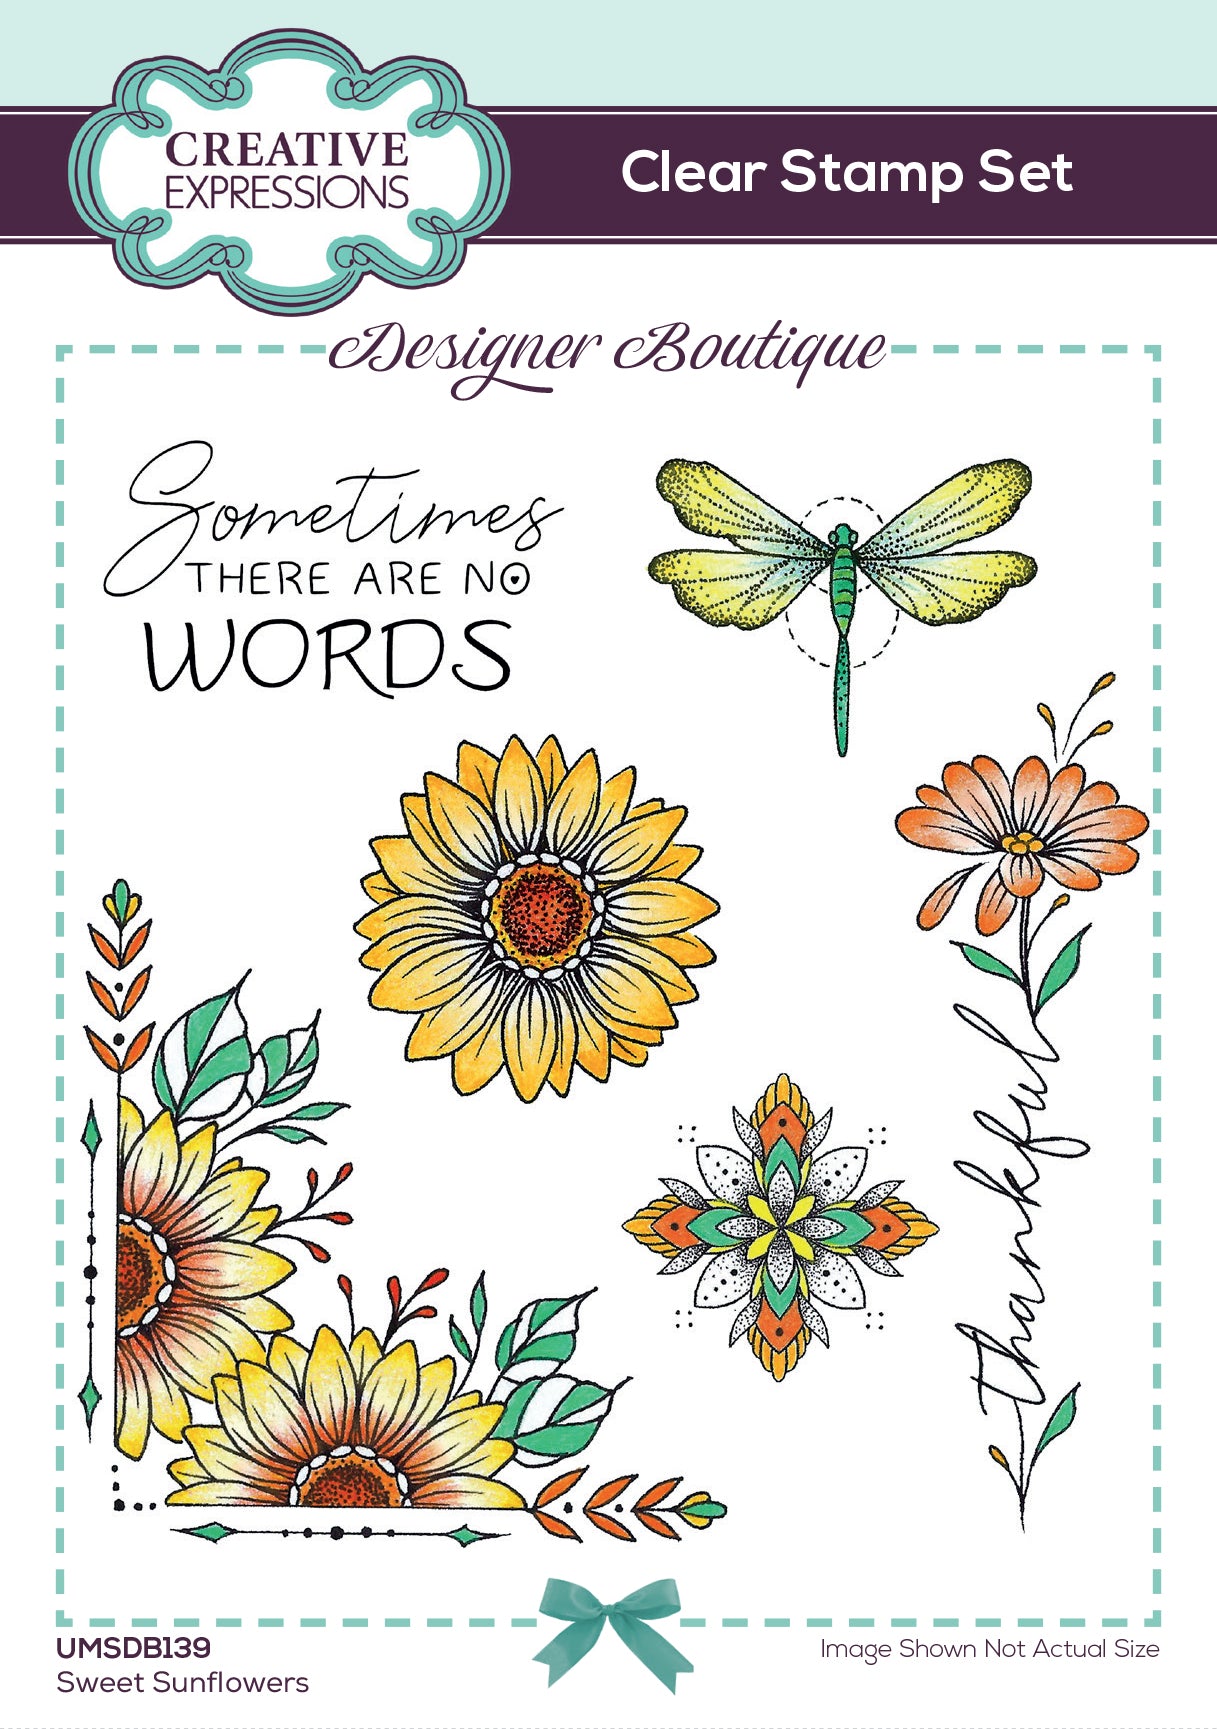 Creative Expressions Designer Boutique Sweet Sunflowers 6 in x 4 in Stamp Set